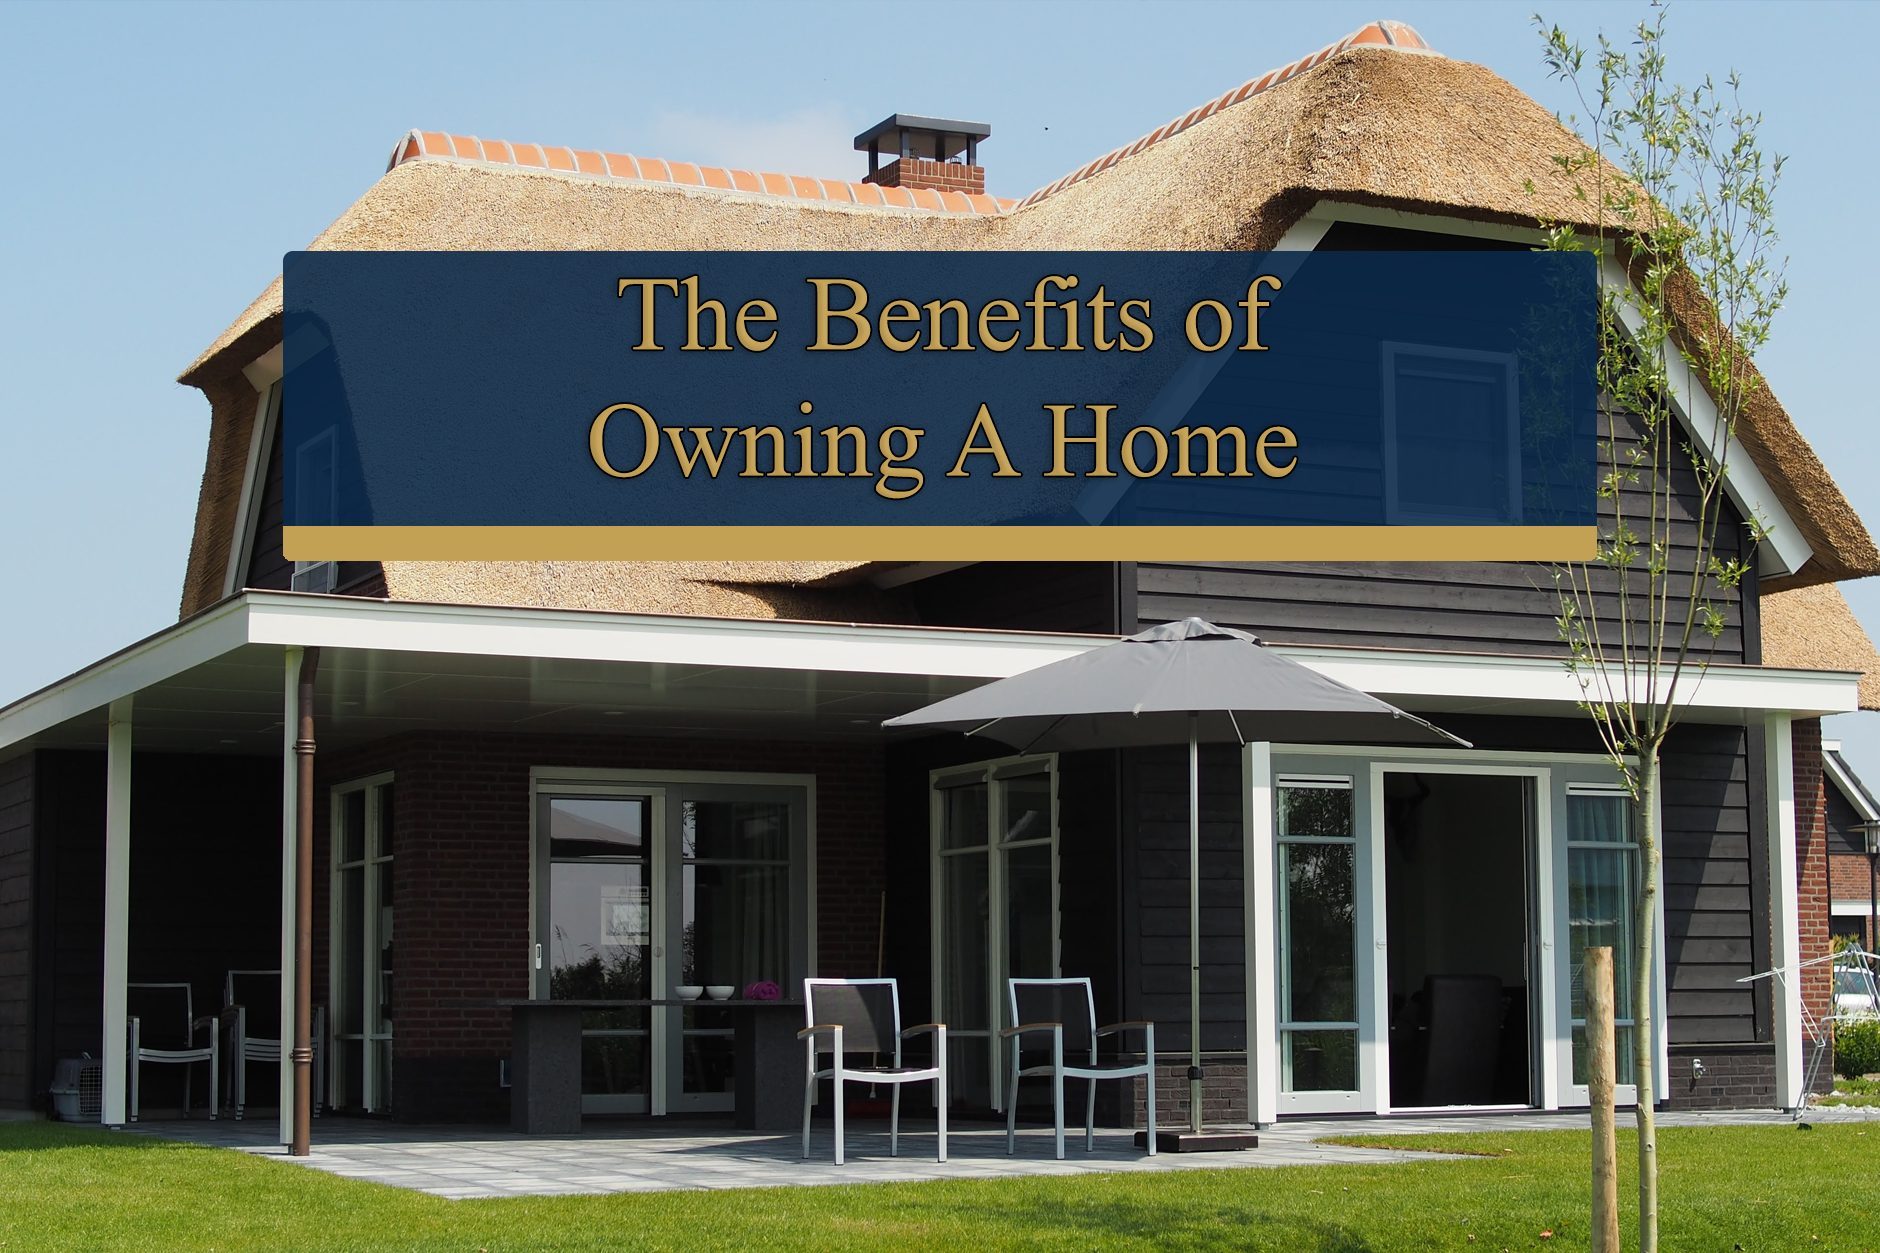 The Benefits of Owning a Home